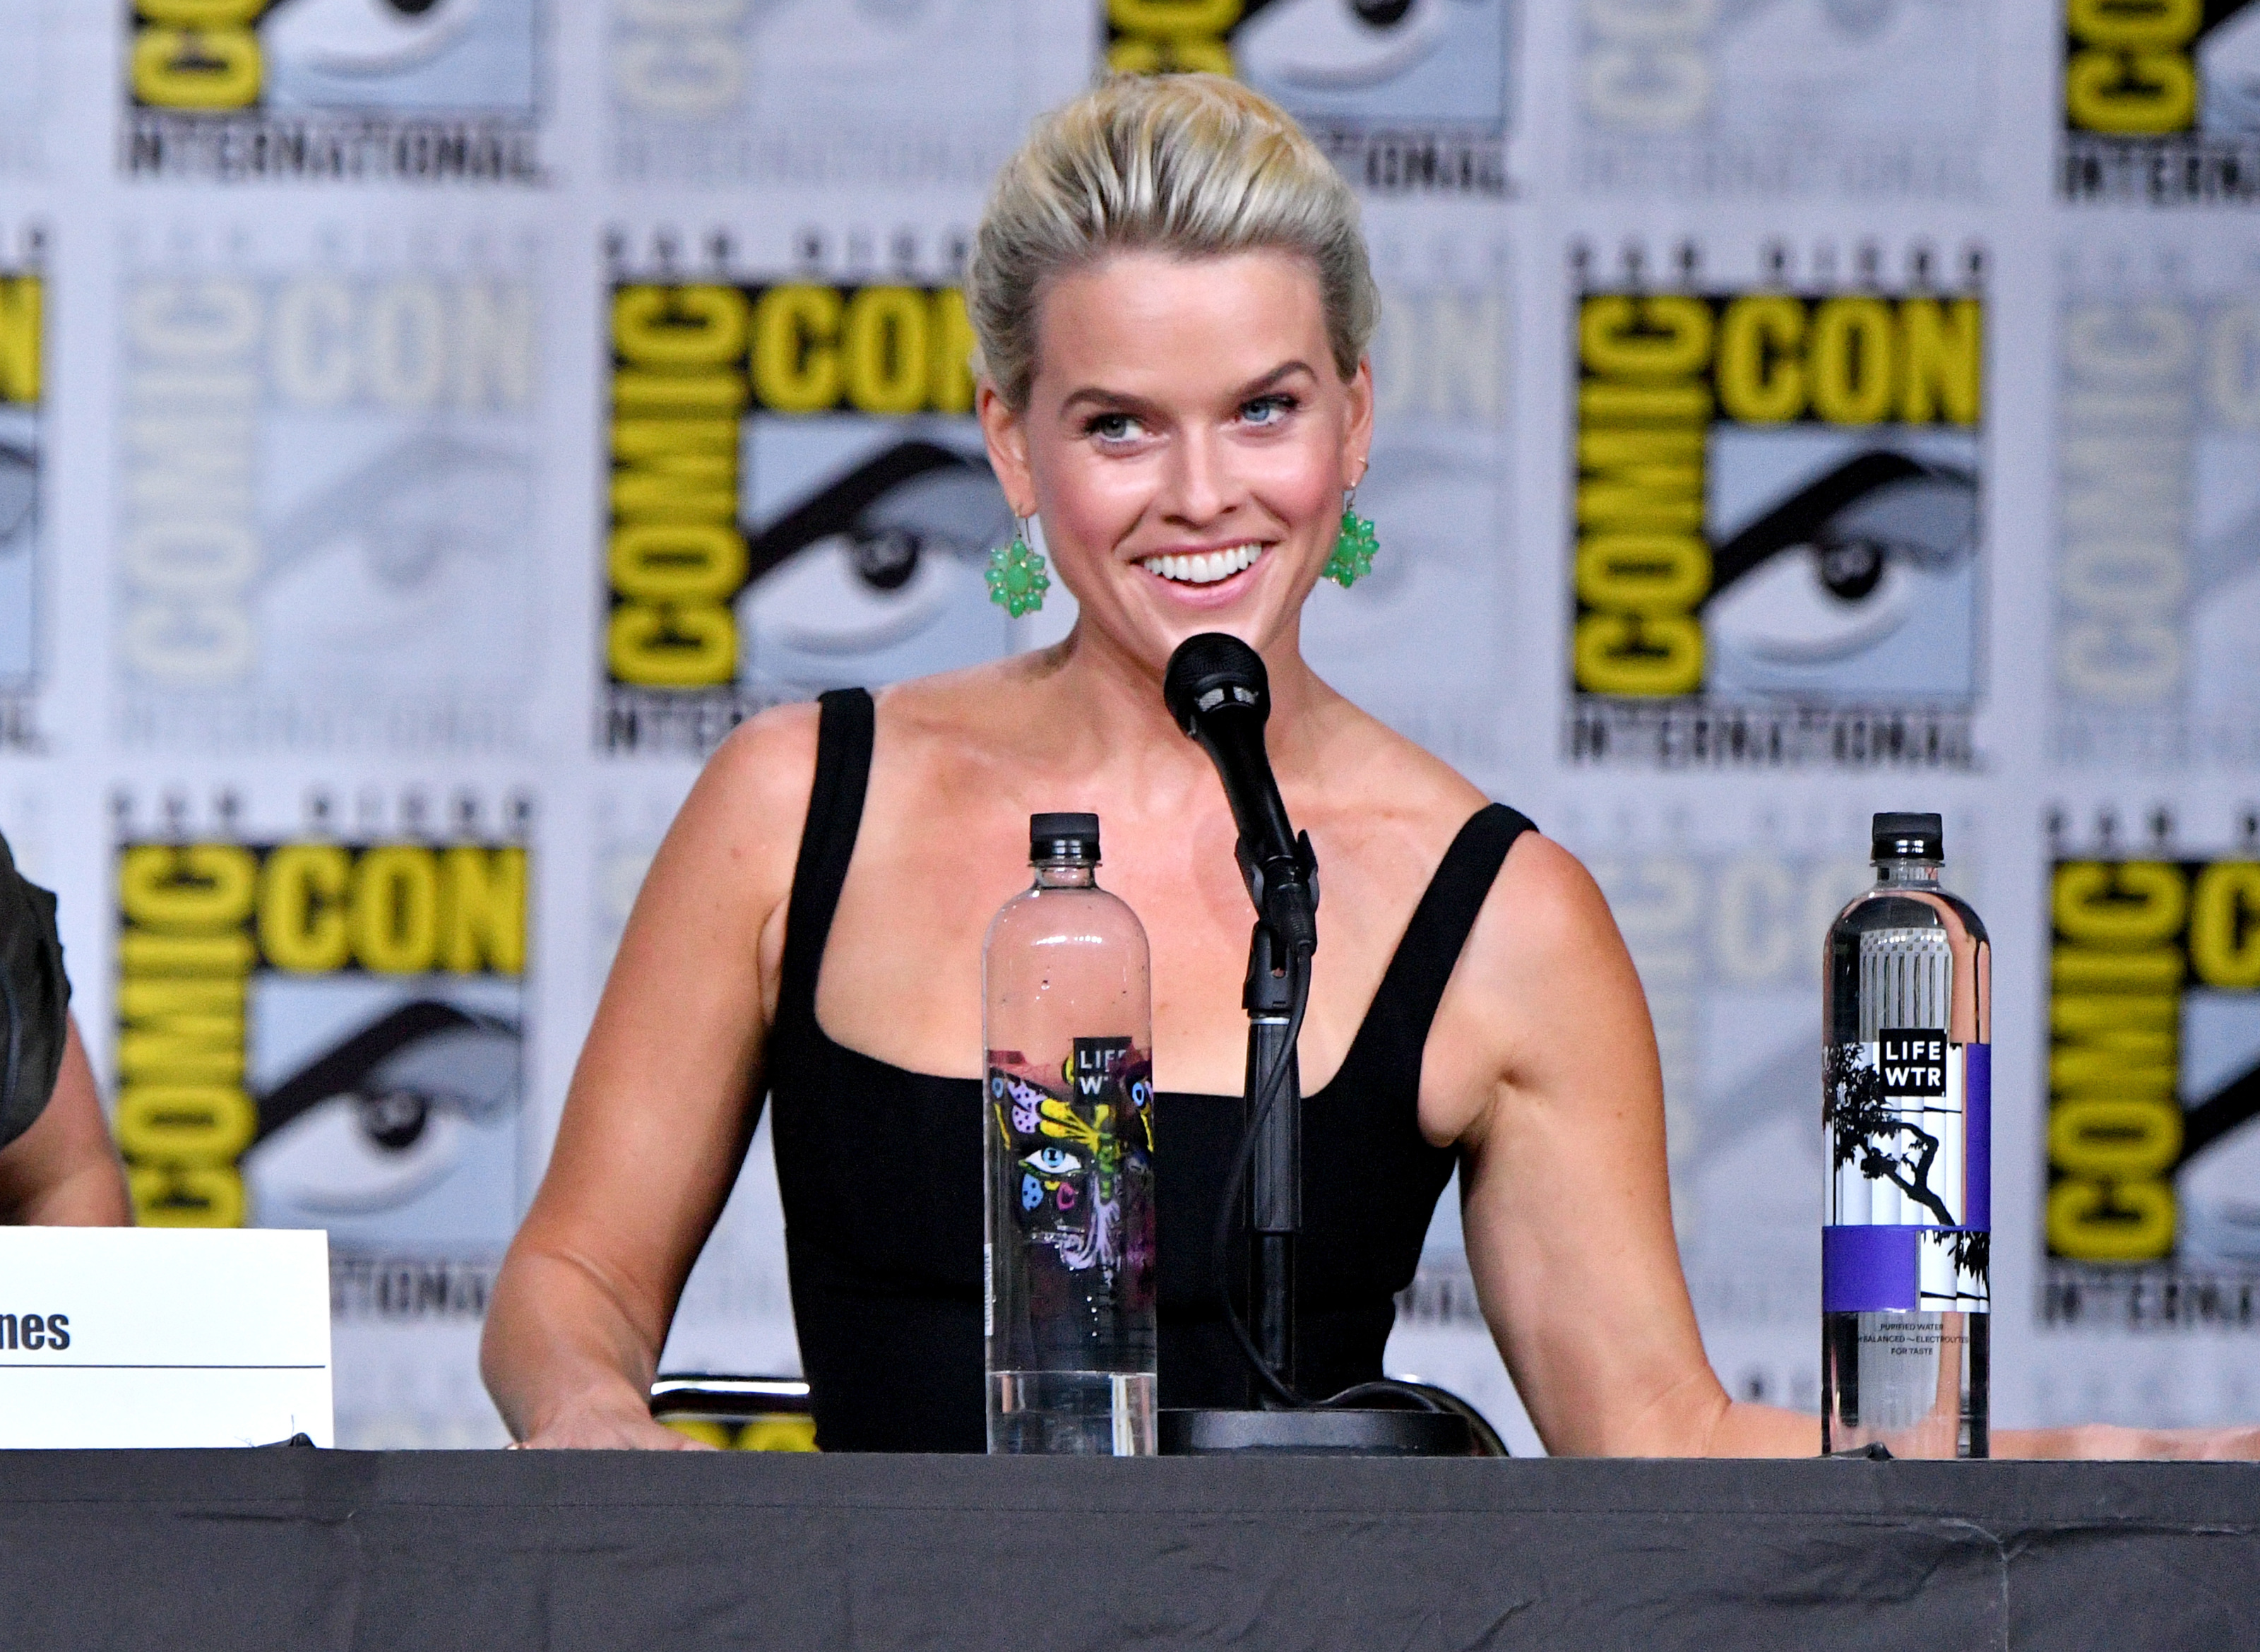 Alice Eve joins the cast for Season 2 of Marvel's Iron Fist